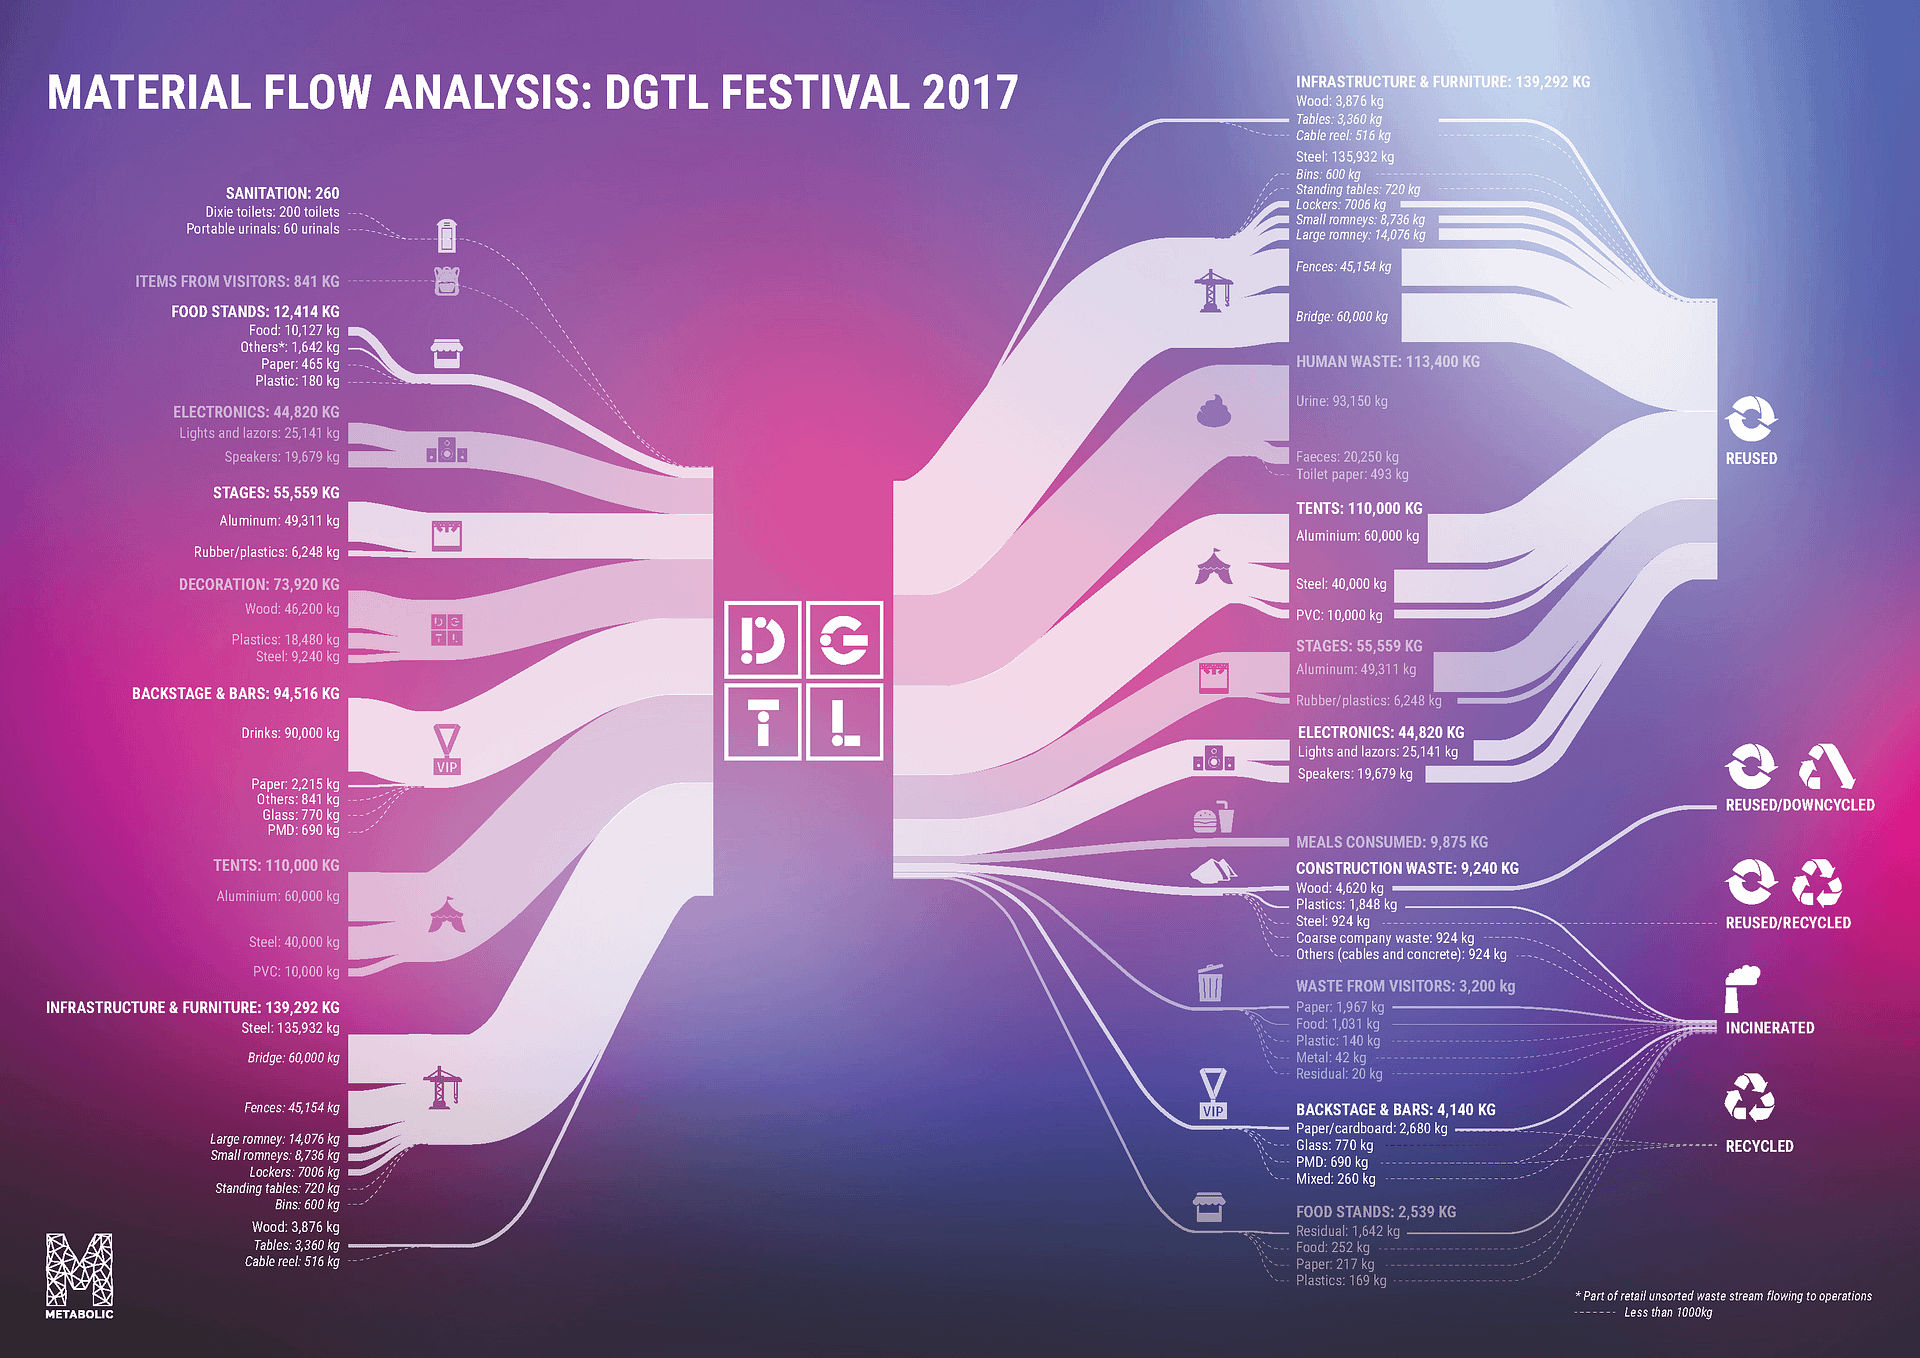 Metabolic measured all the materials coming in and out of this year’s DGTL festival in what we call a “material flow analysis”.